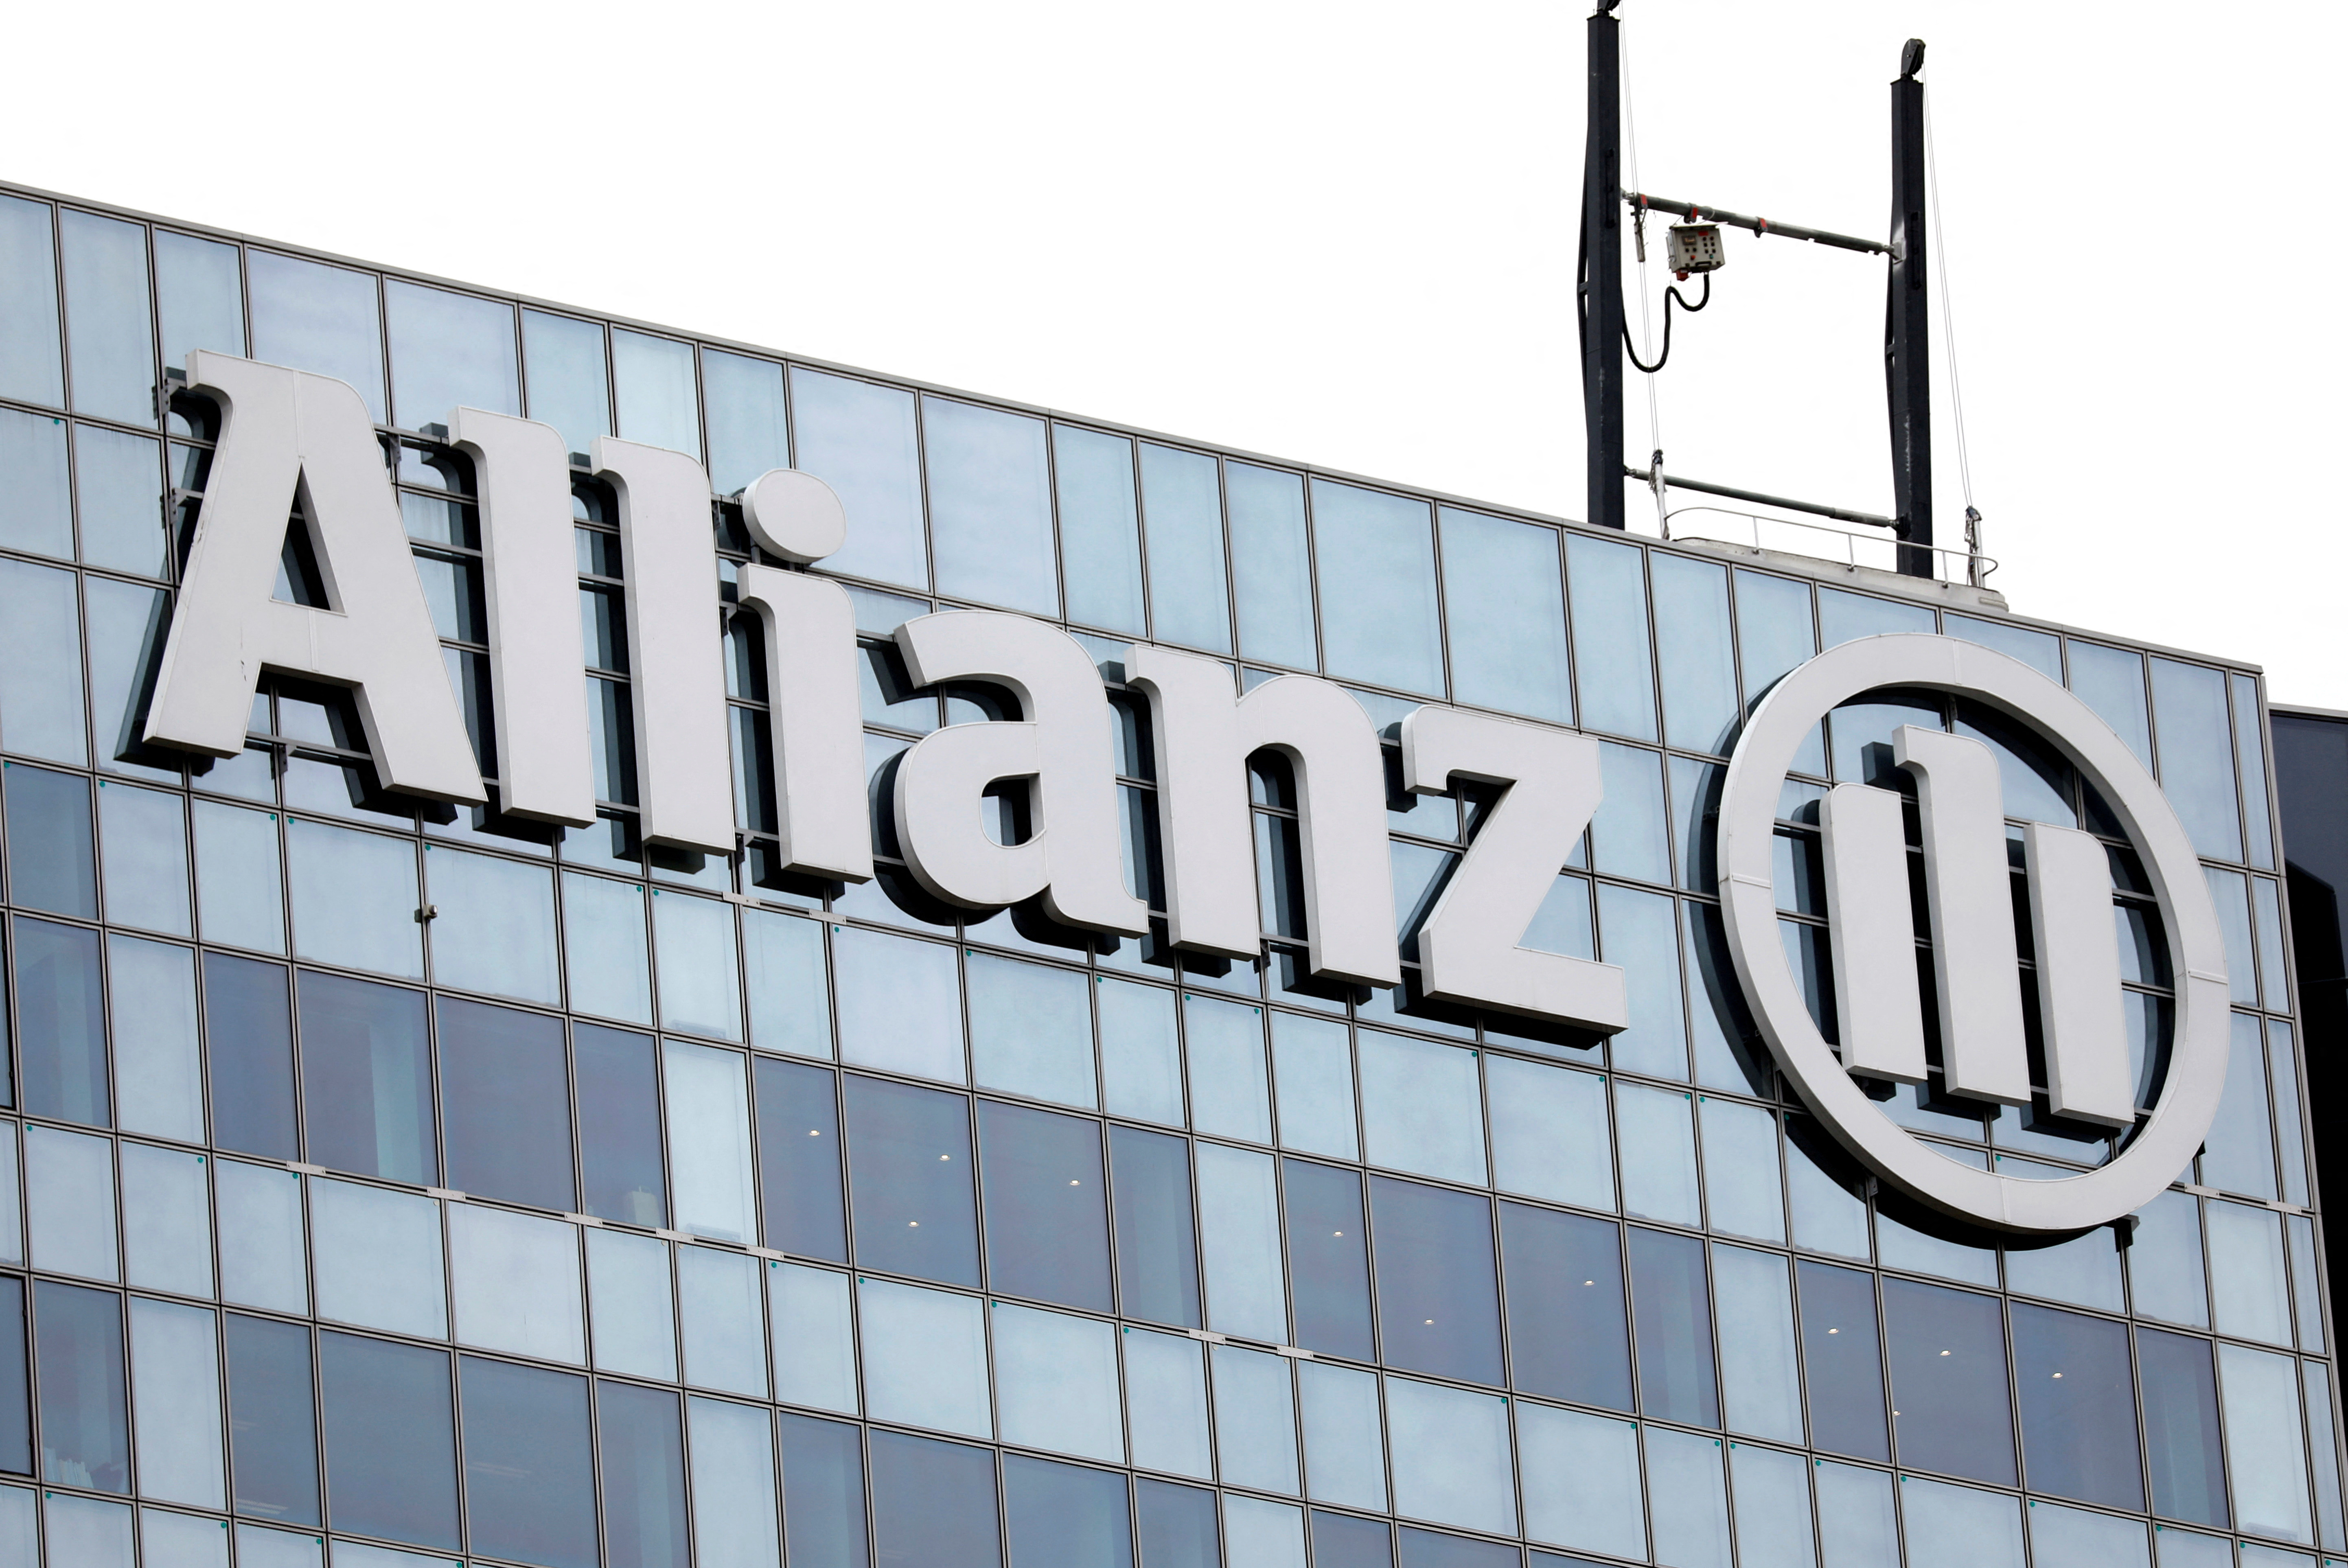 Insurance Business: Latest Allianz Results & Update on LV= Transfer 